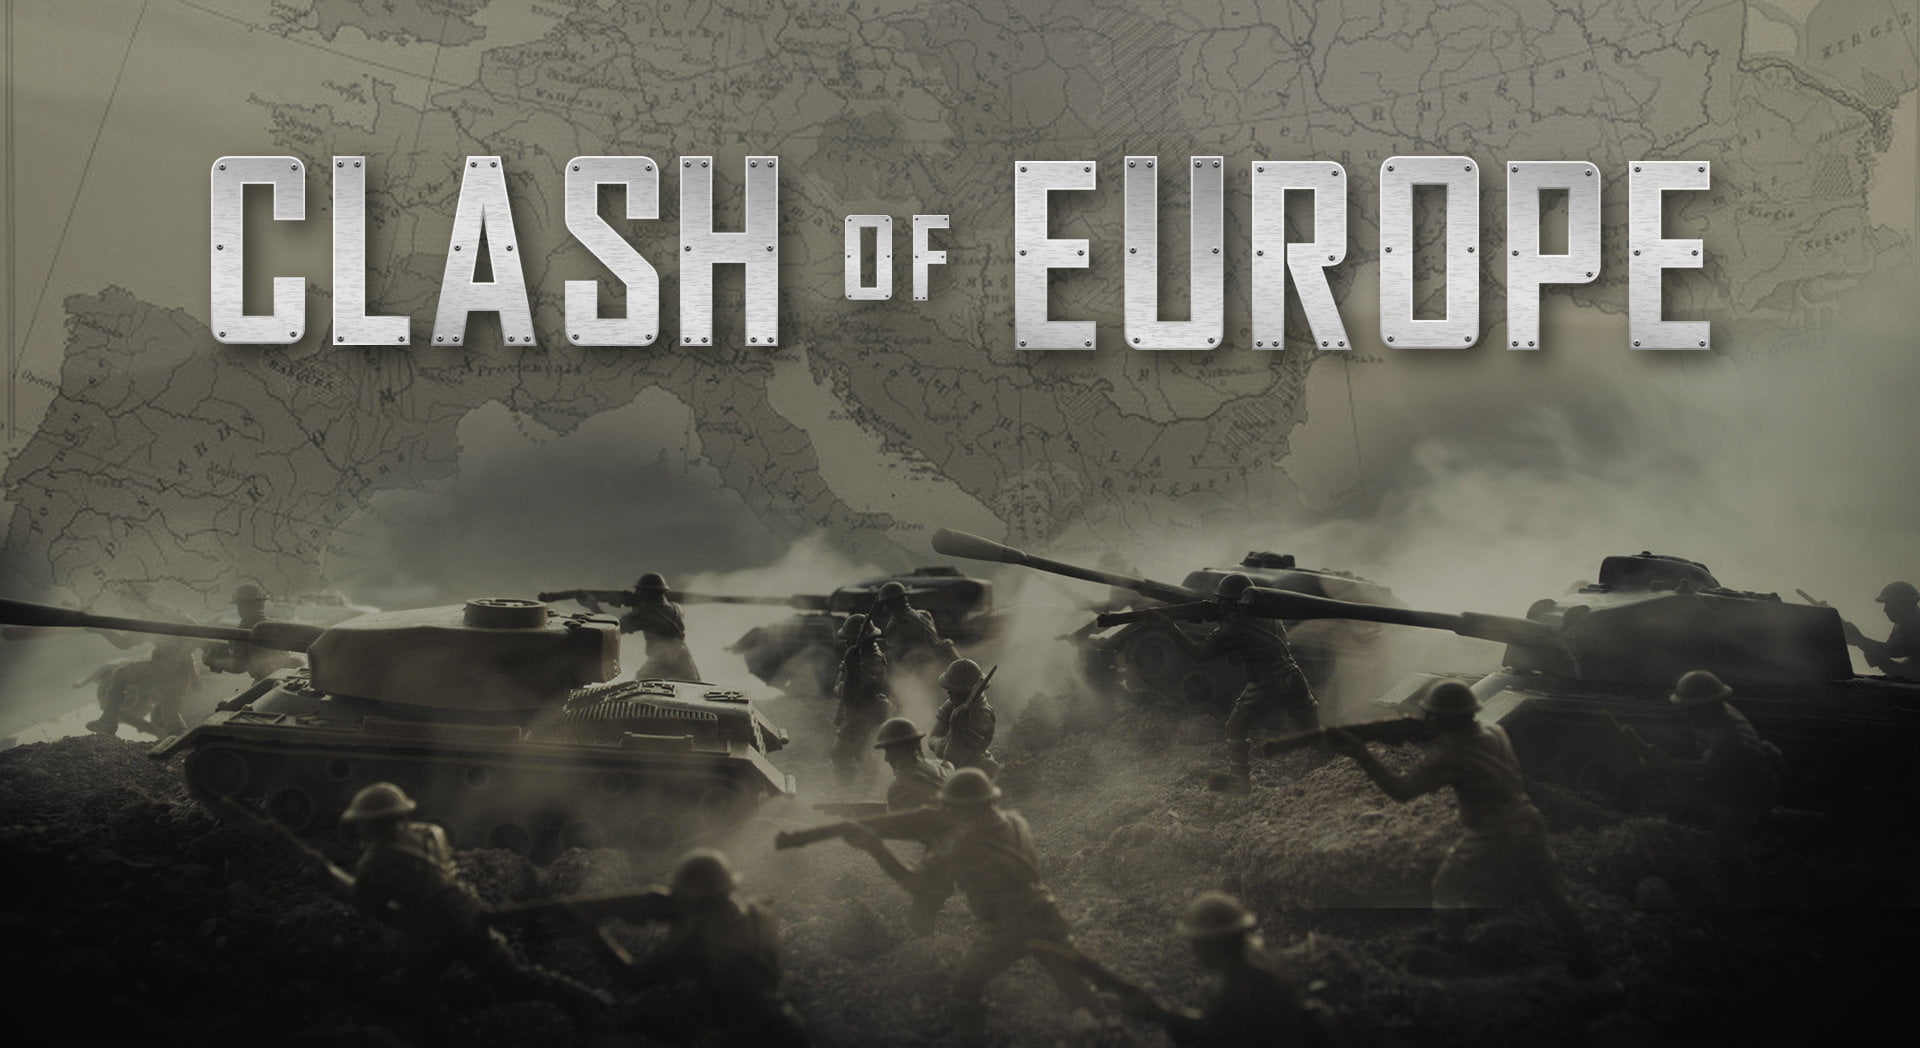 Europe Clash of Nations, Call of War by Bytro Wikia